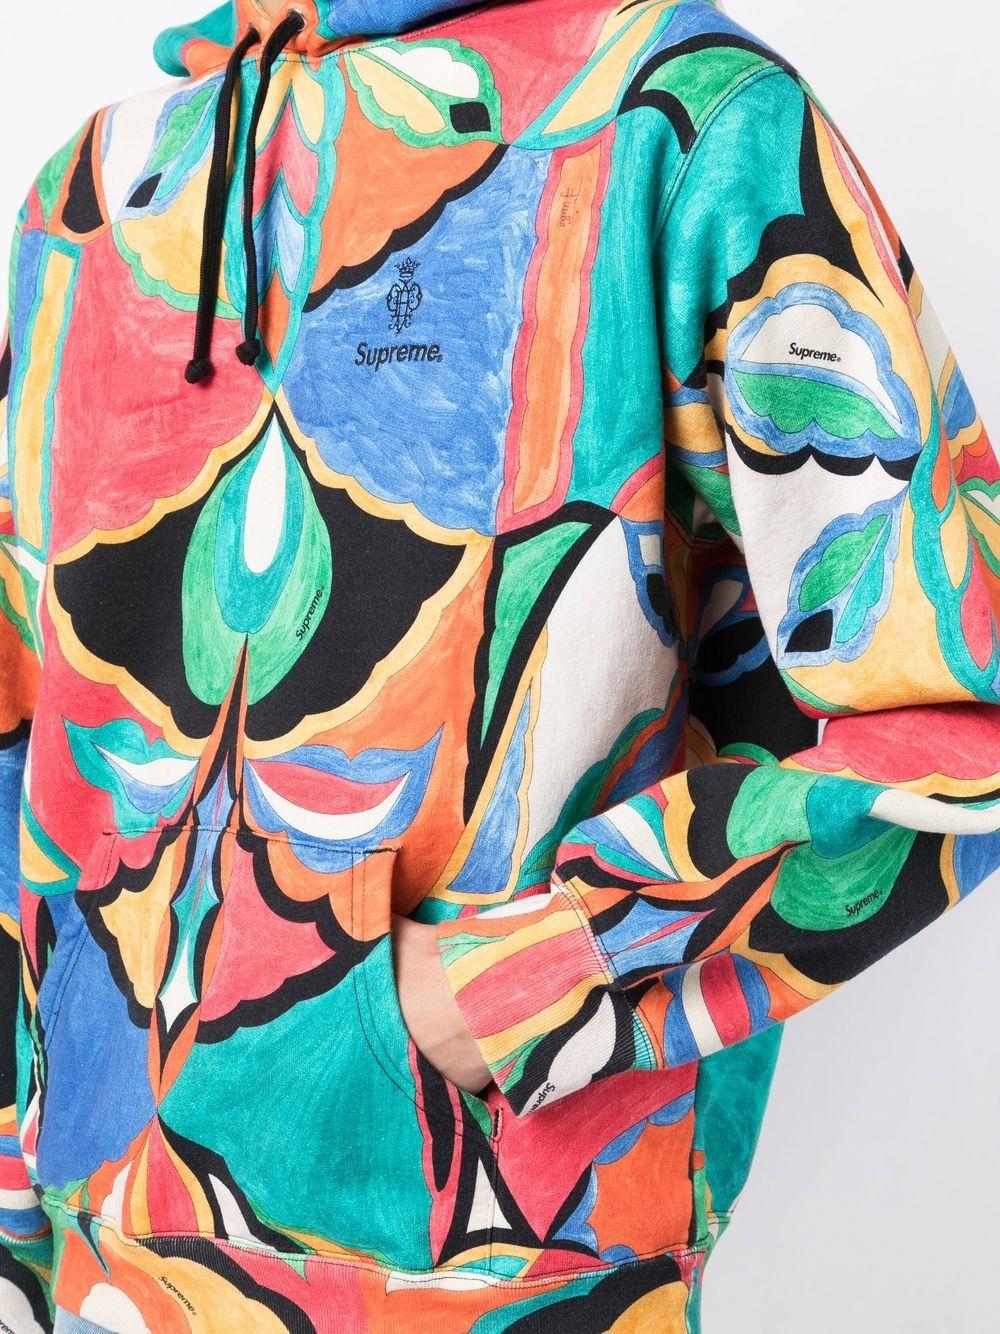 From the 2021 collaboration between Supreme and Emilio Pucci, this fun cross between luxury fashion and streetwear was a sell-out. Designed with an oversized brightly colored, abstract swirling print, the hoodie has been crafted from a fleece-back